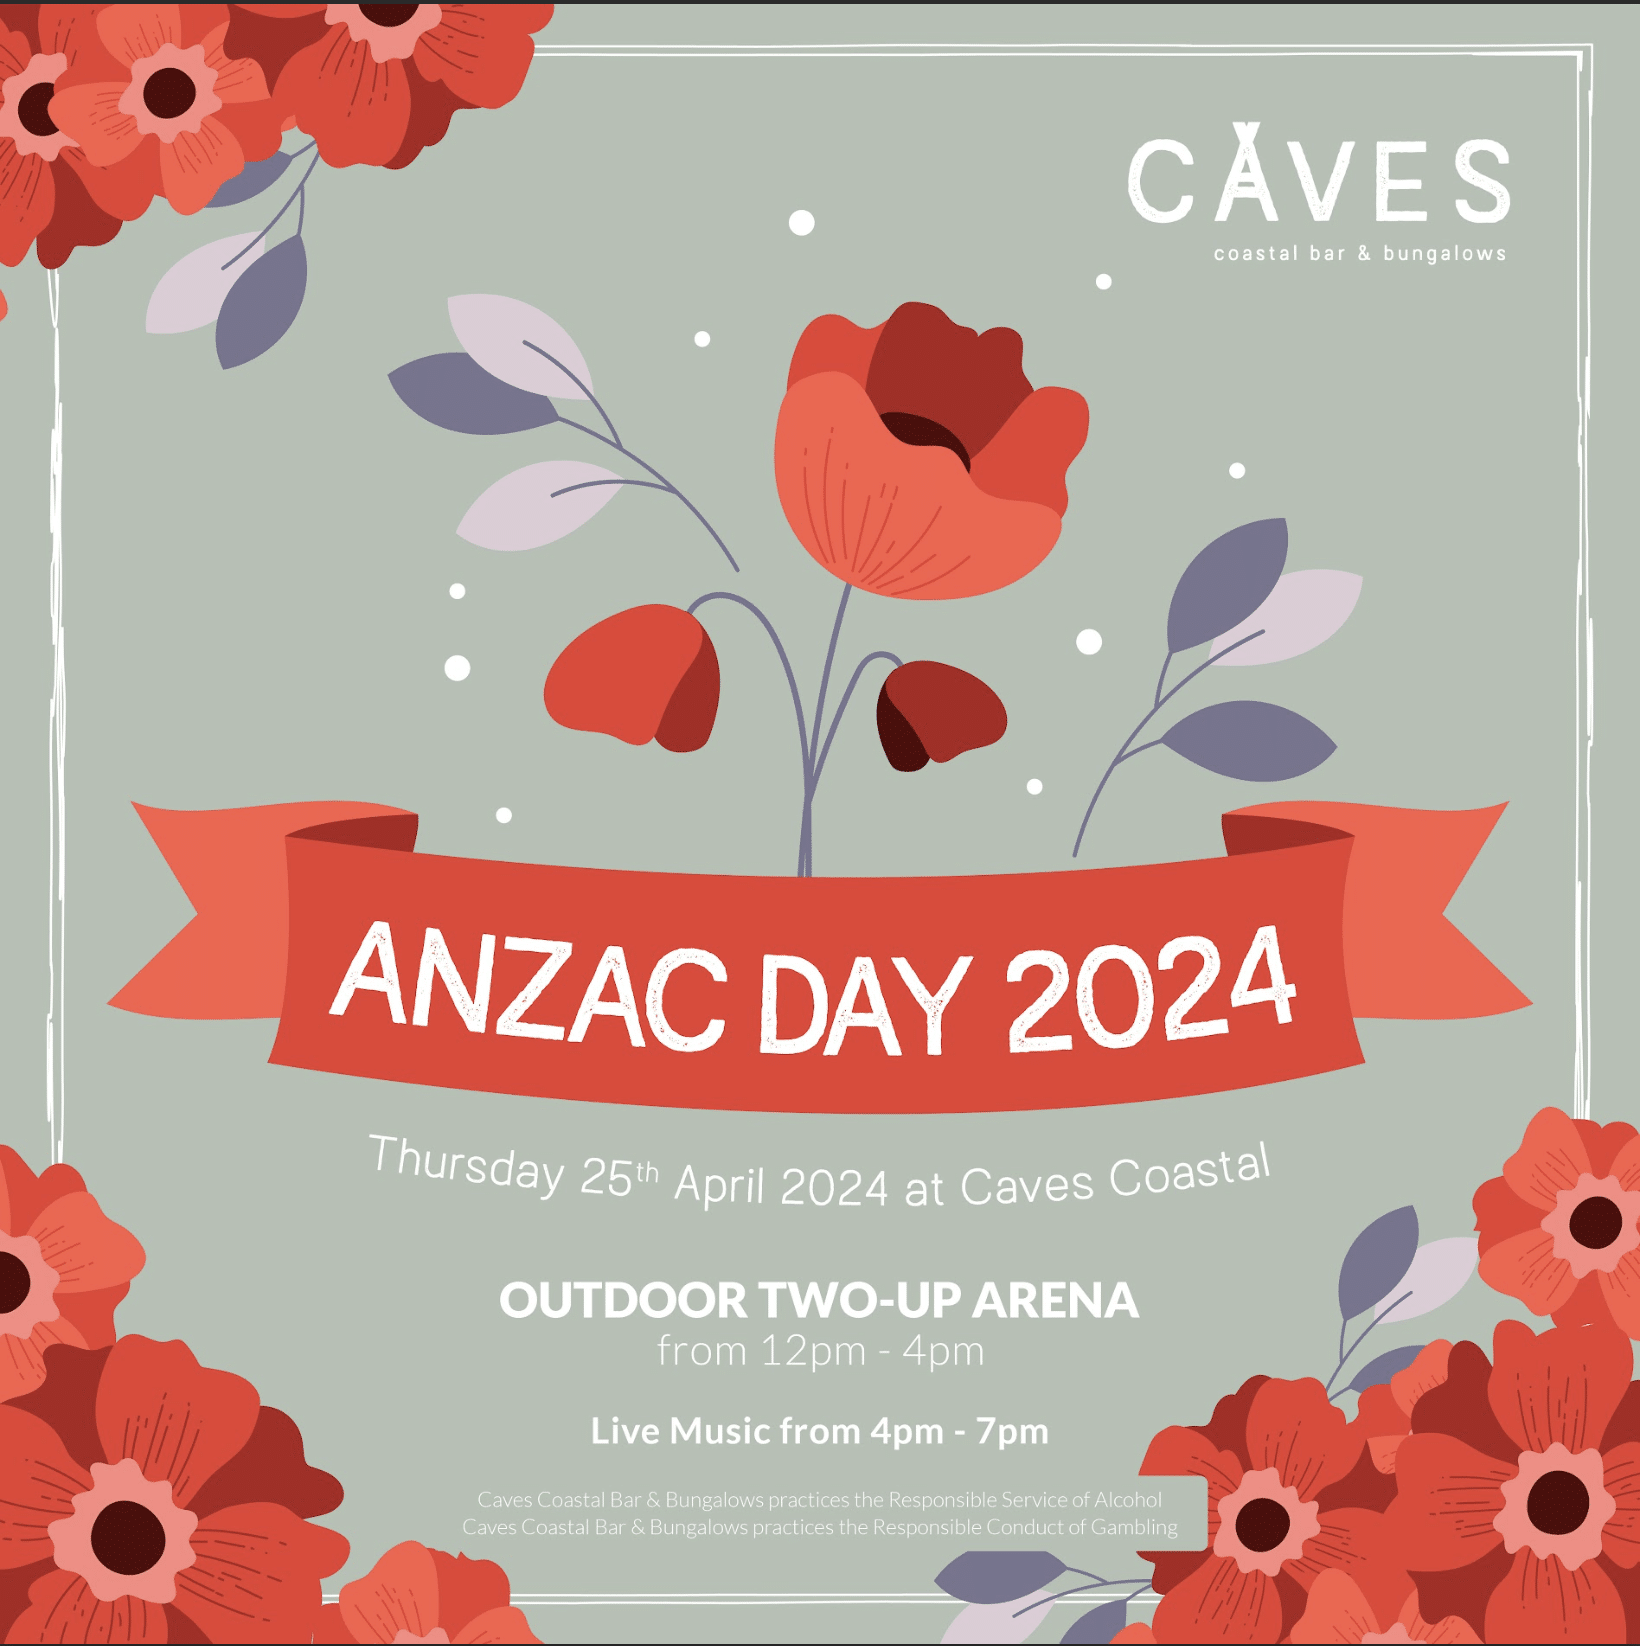 anzac day caves